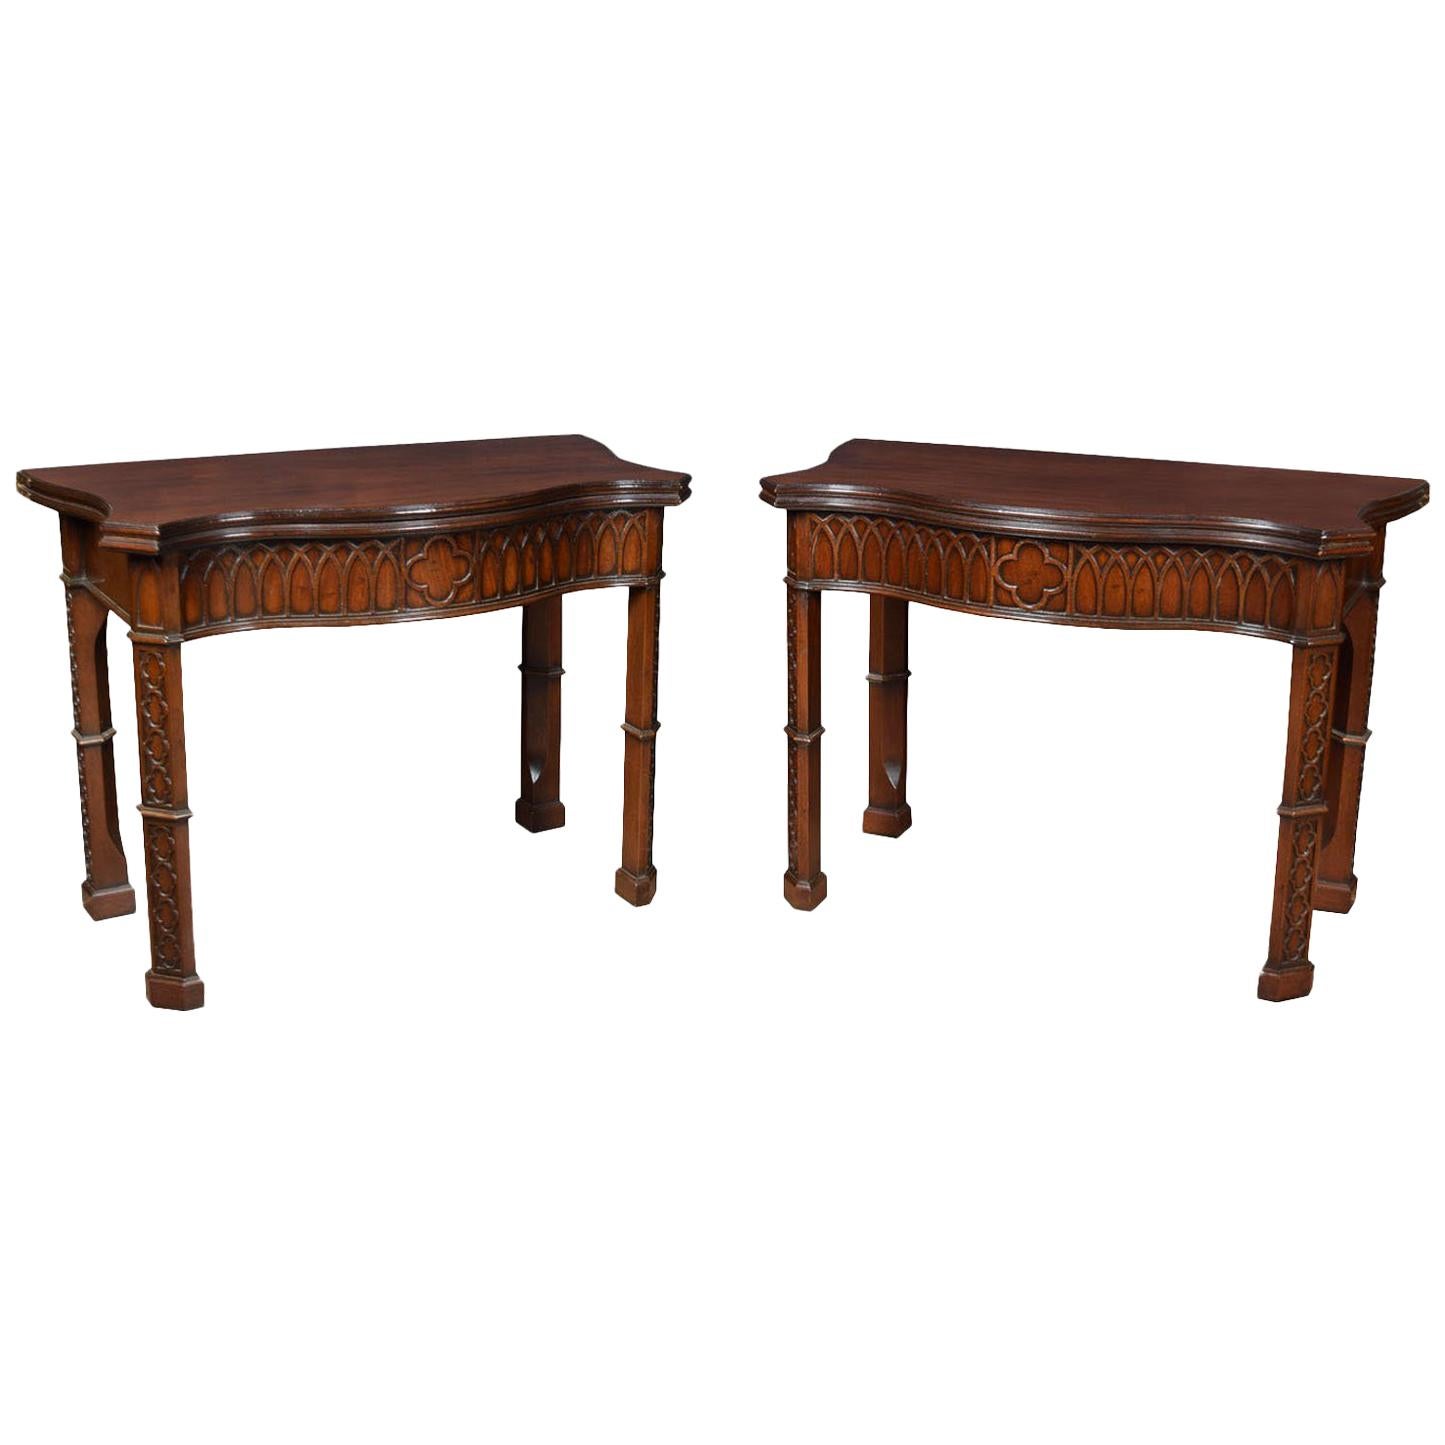 Pair of Gothic Revival card tables of serpentine outline fitted with swivel tops opening to reveal a baize lined interior above geometric carved freeze all raised up on four chamfered blind fret carved legs.

Dimensions:

Height 30.5